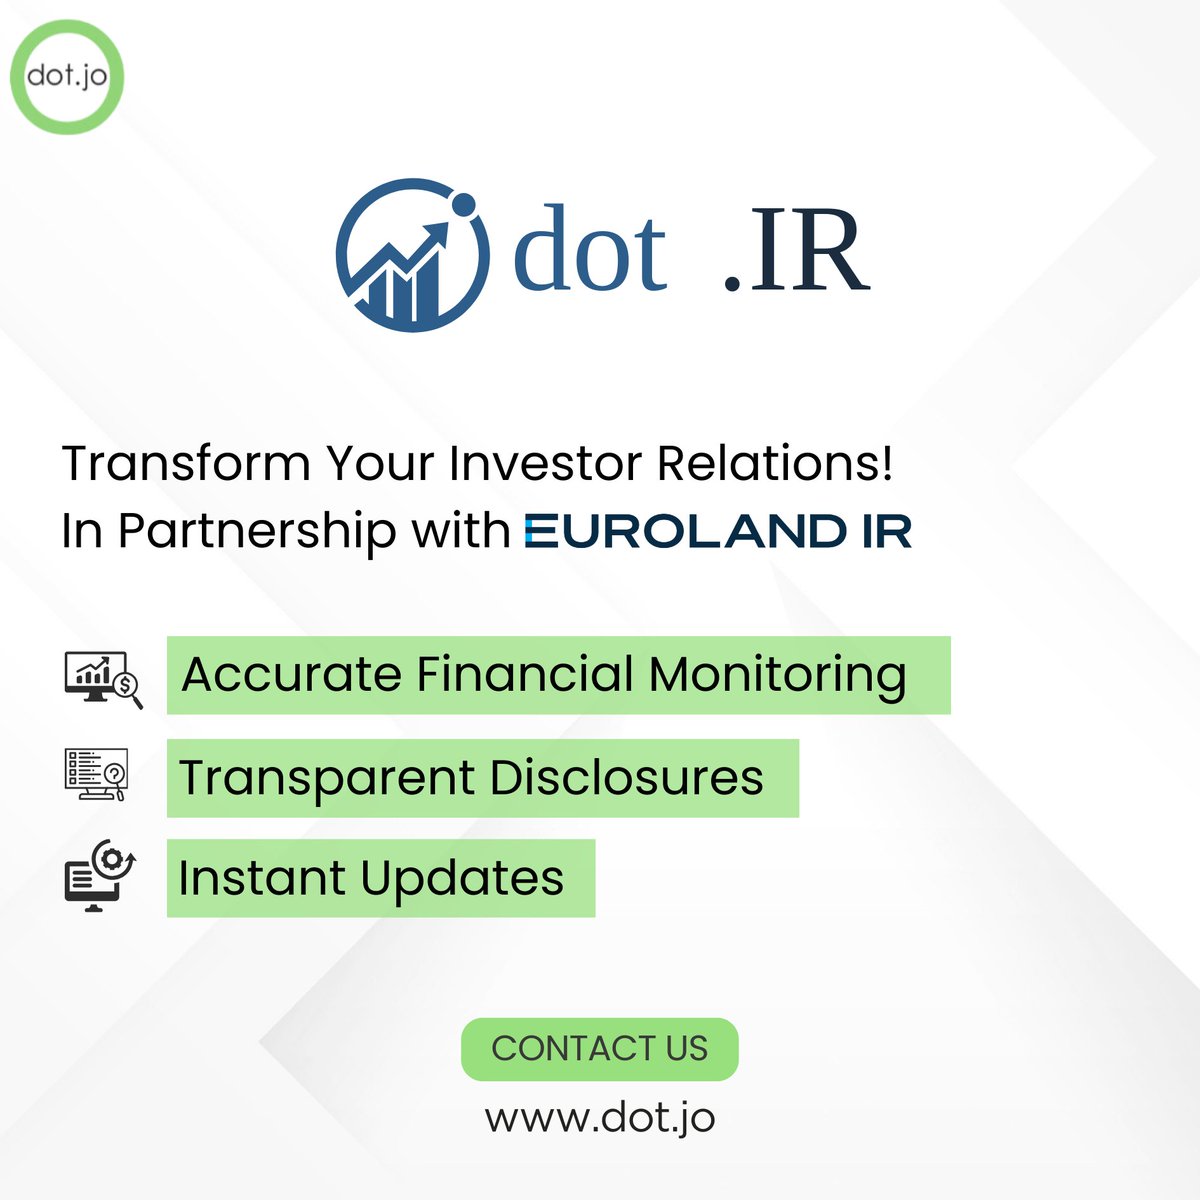 Dive into the era of enhanced financial clarity and investor engagement with our advanced #investor_relations widgets.
Crafted in partnership with #Euroland, these tools are designed to deliver real-time financial insights, driving transparency and investor confidence.